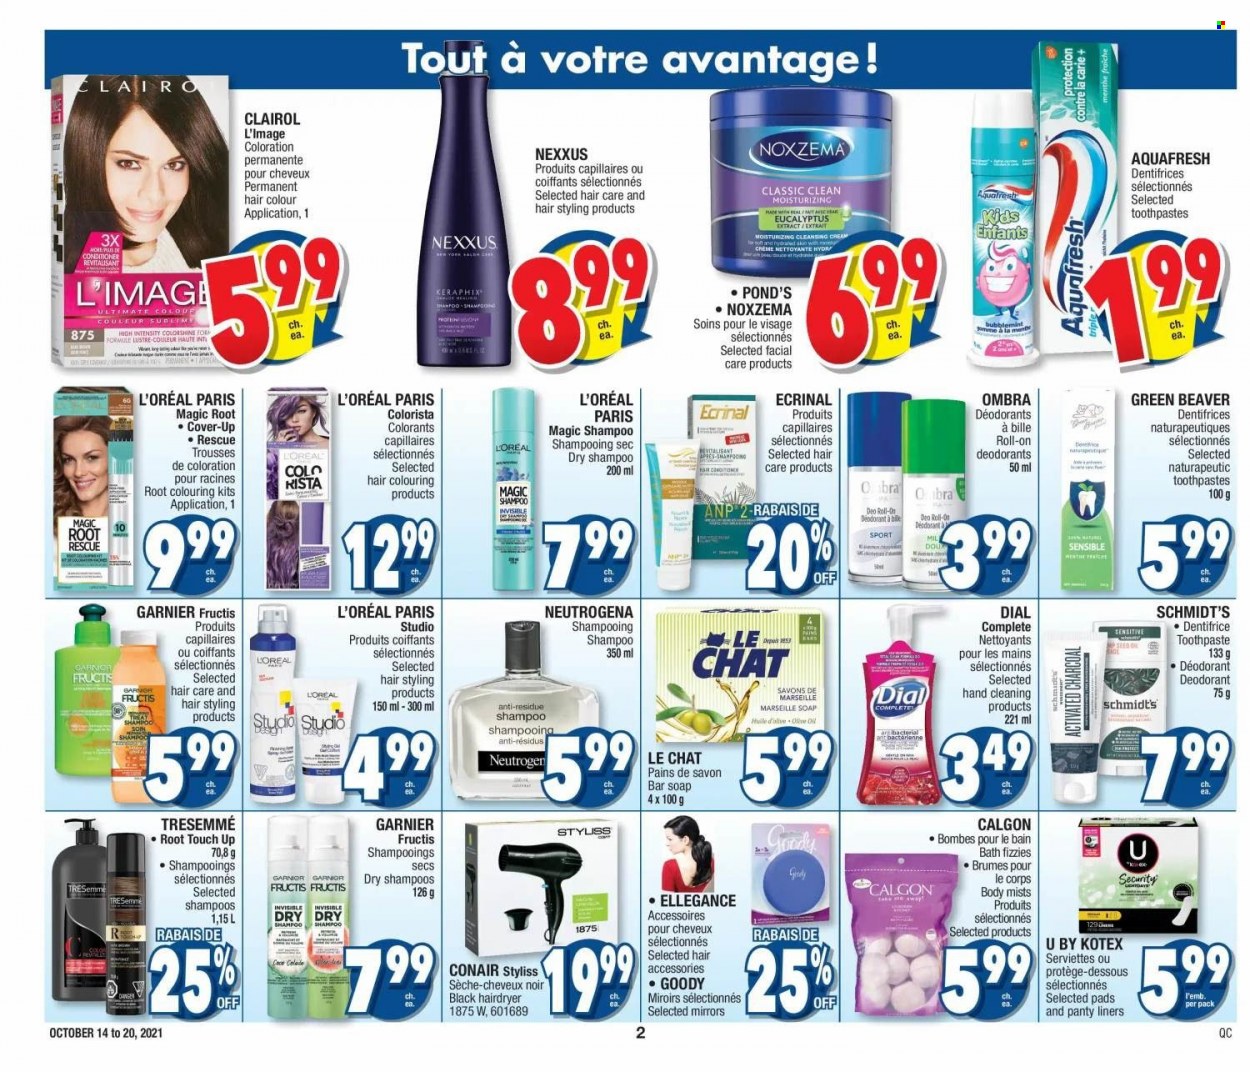 thumbnail - Jean Coutu Flyer - October 14, 2021 - October 20, 2021 - Sales products - oil, soap bar, POND'S, Dial, soap, toothpaste, Kotex, L’Oréal, Clairol, conditioner, TRESemmé, hair color, Nexxus, Fructis, anti-perspirant, roll-on, hair dryer, activated charcoal, Garnier, Neutrogena, shampoo, deodorant. Page 2.